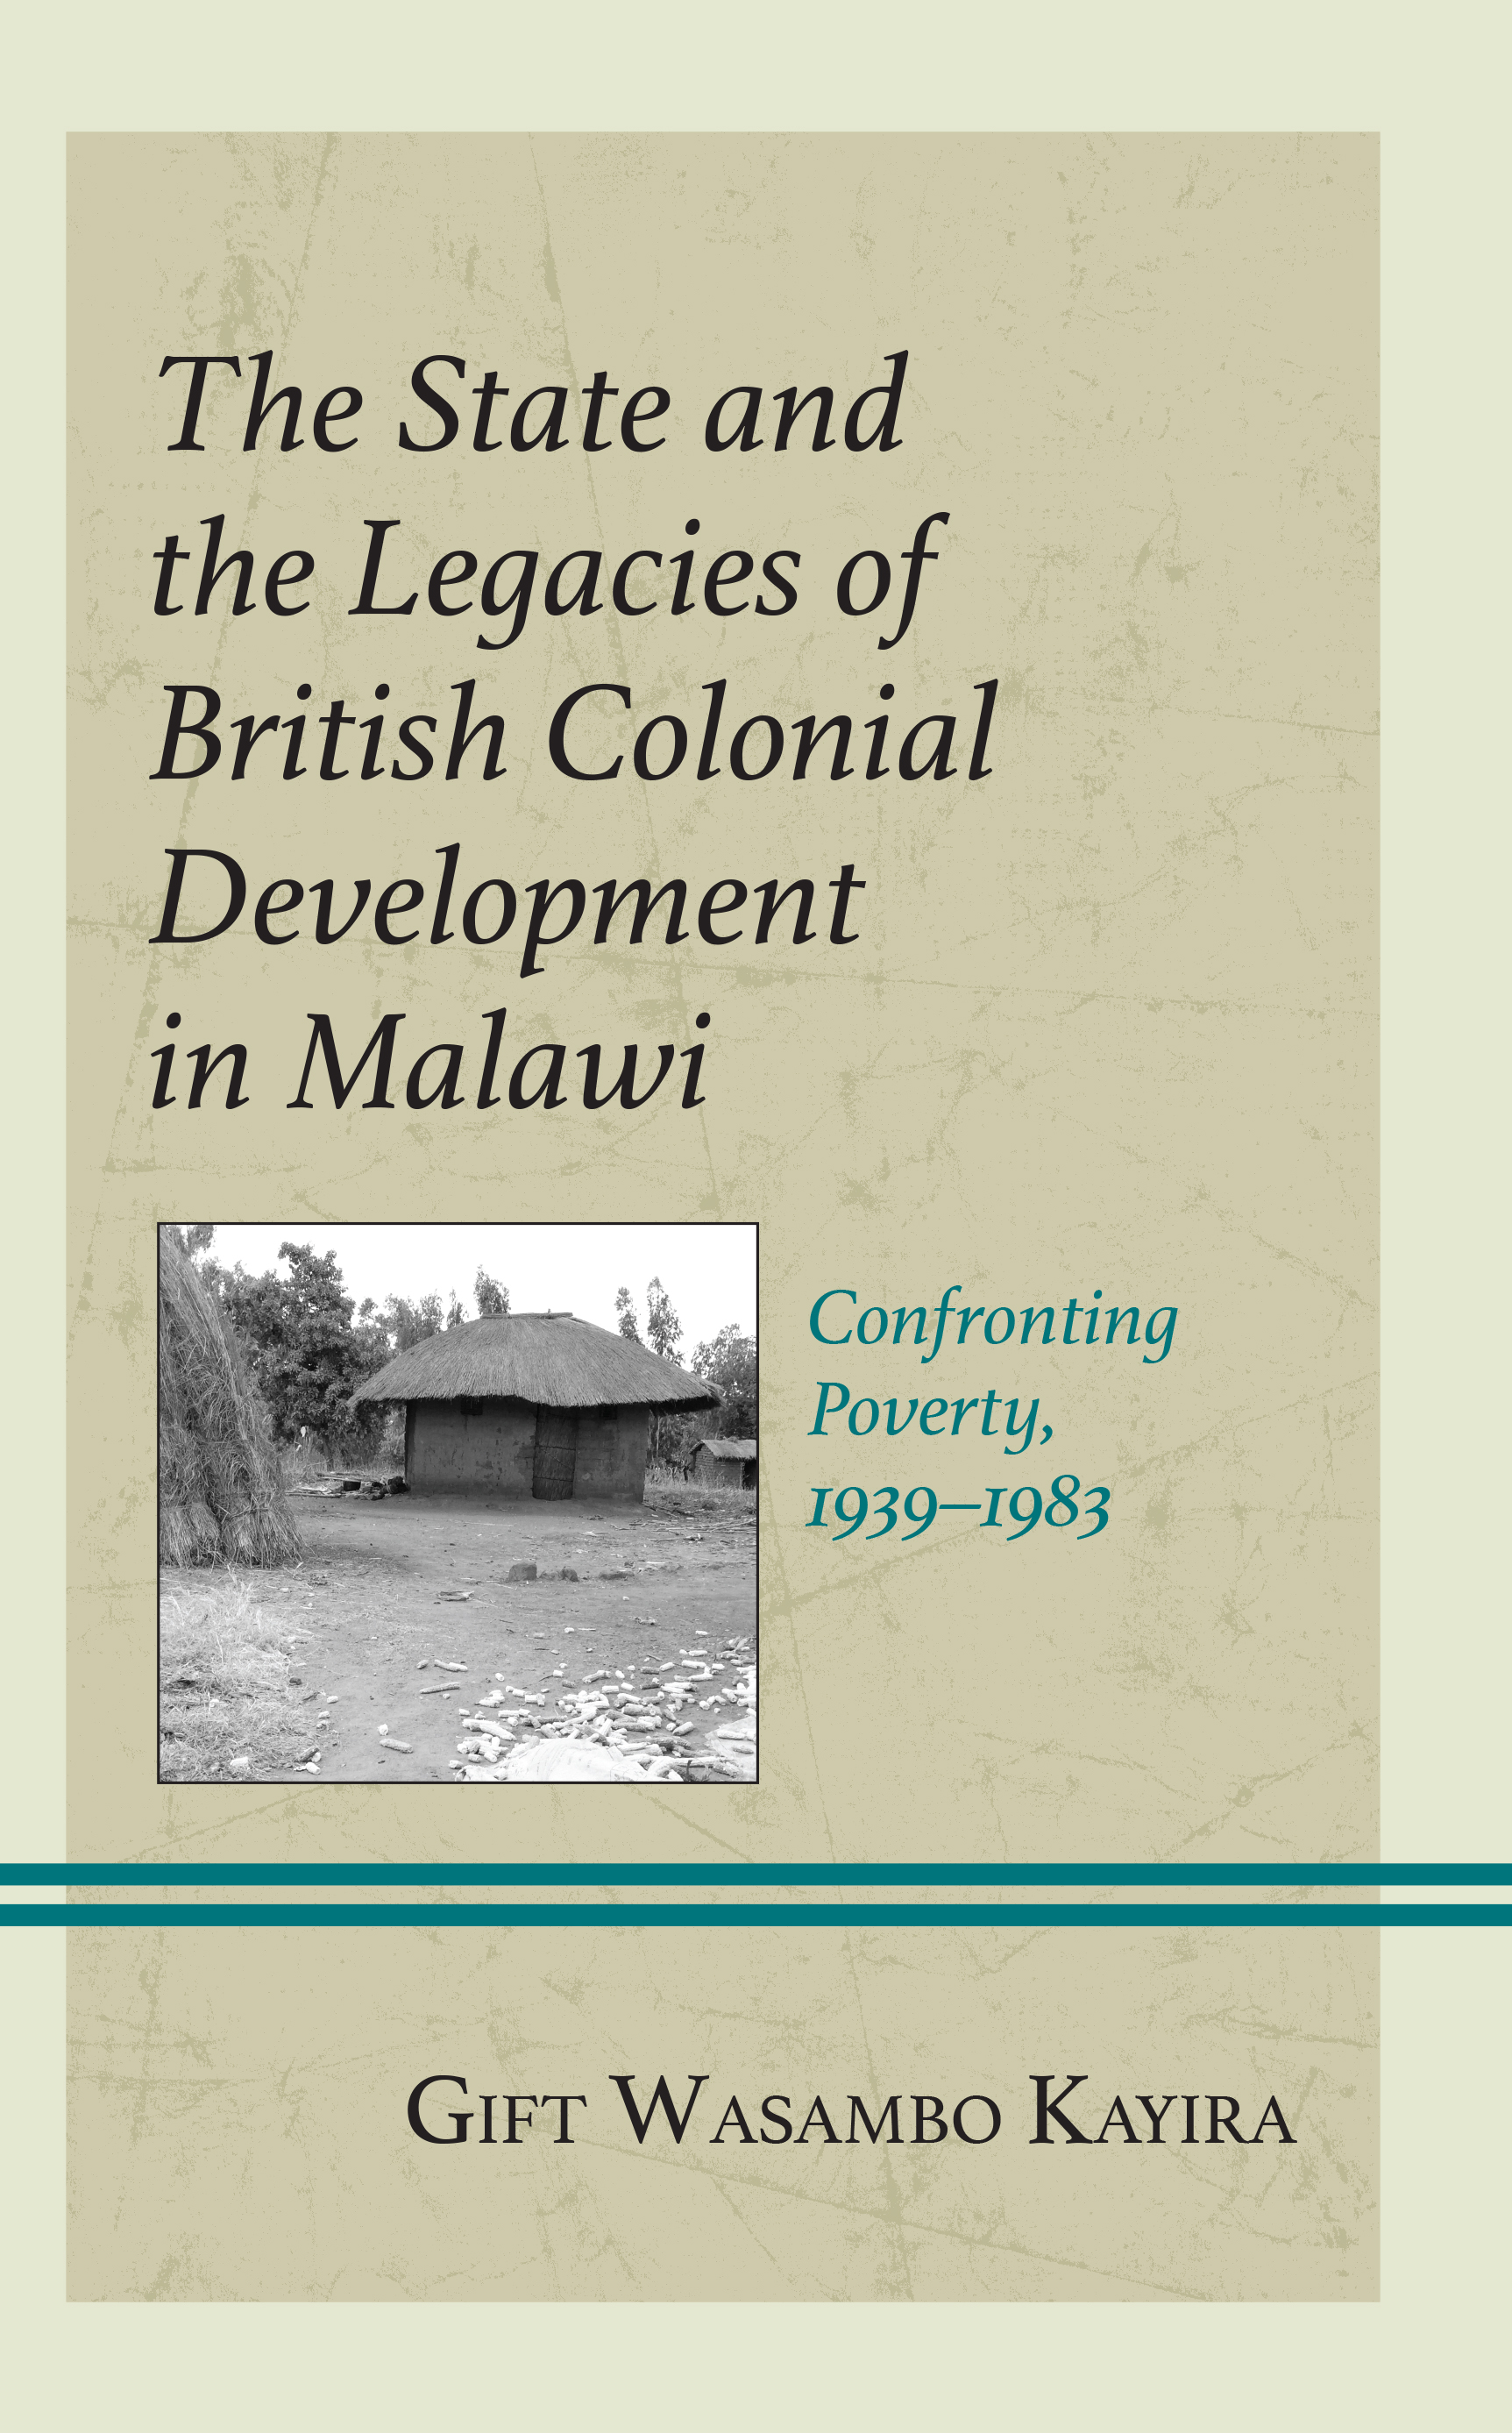 The State and the Legacies of British Colonial Development in Malawi: Confronting Poverty, 1939–1983